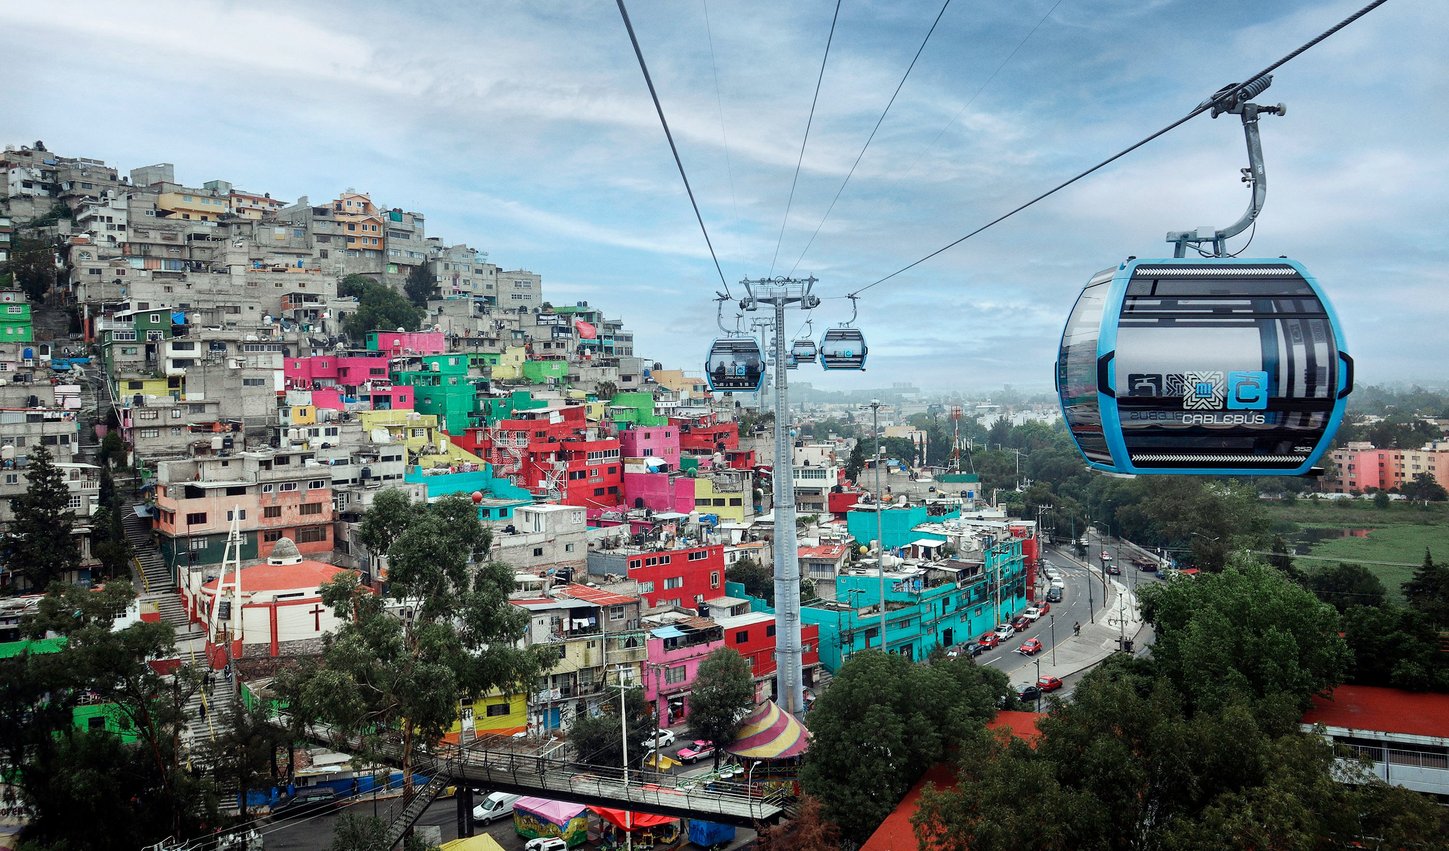 Photo of the ropeway in Mexico City, which gondolas above the rooftops and connects the workers' cuautepec district with the city's metro network.